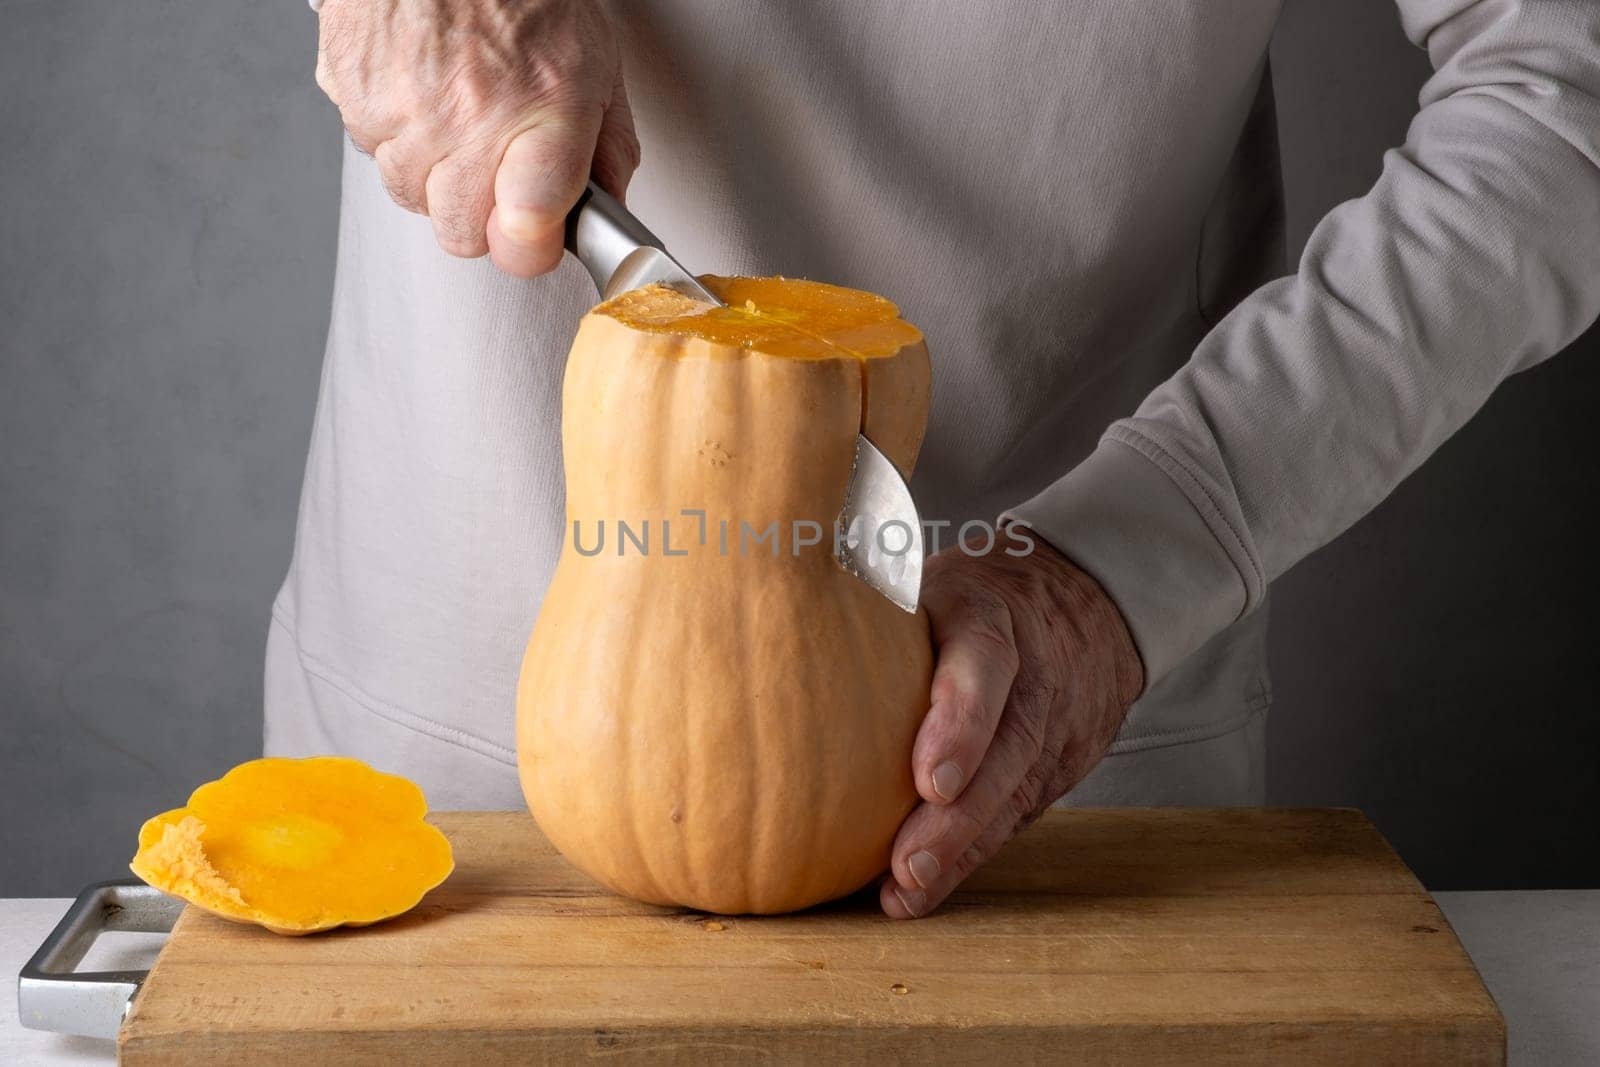 Caucasian unrecognizable middle-aged man cutting pumpkin on a wooden cutting board. Selective focus.